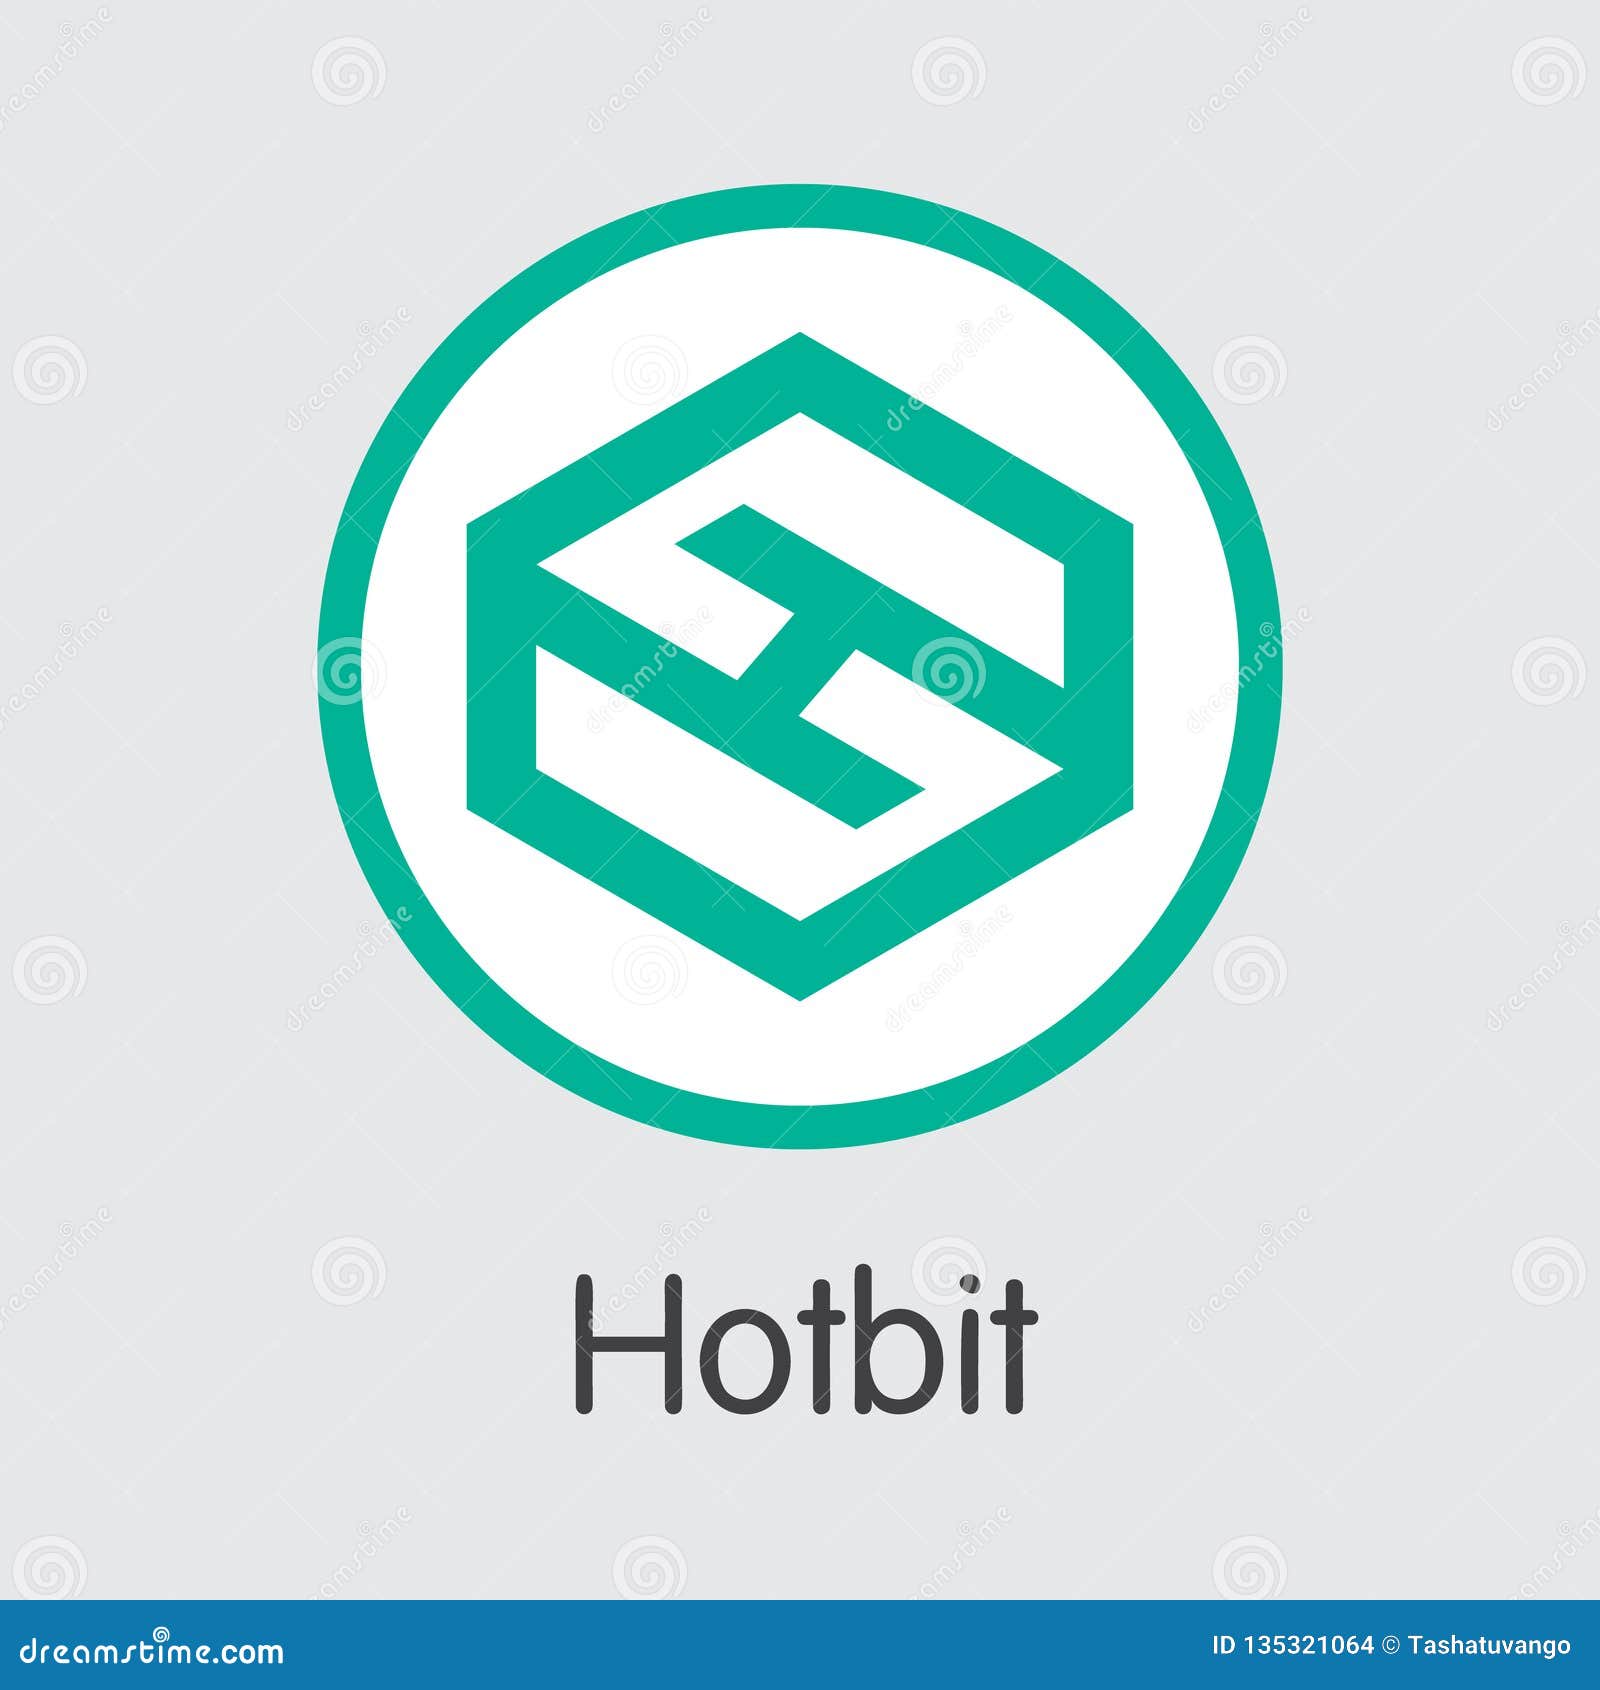 Exchange - Hotbit Copy. The Crypto Coins Or Cryptocurrency ...